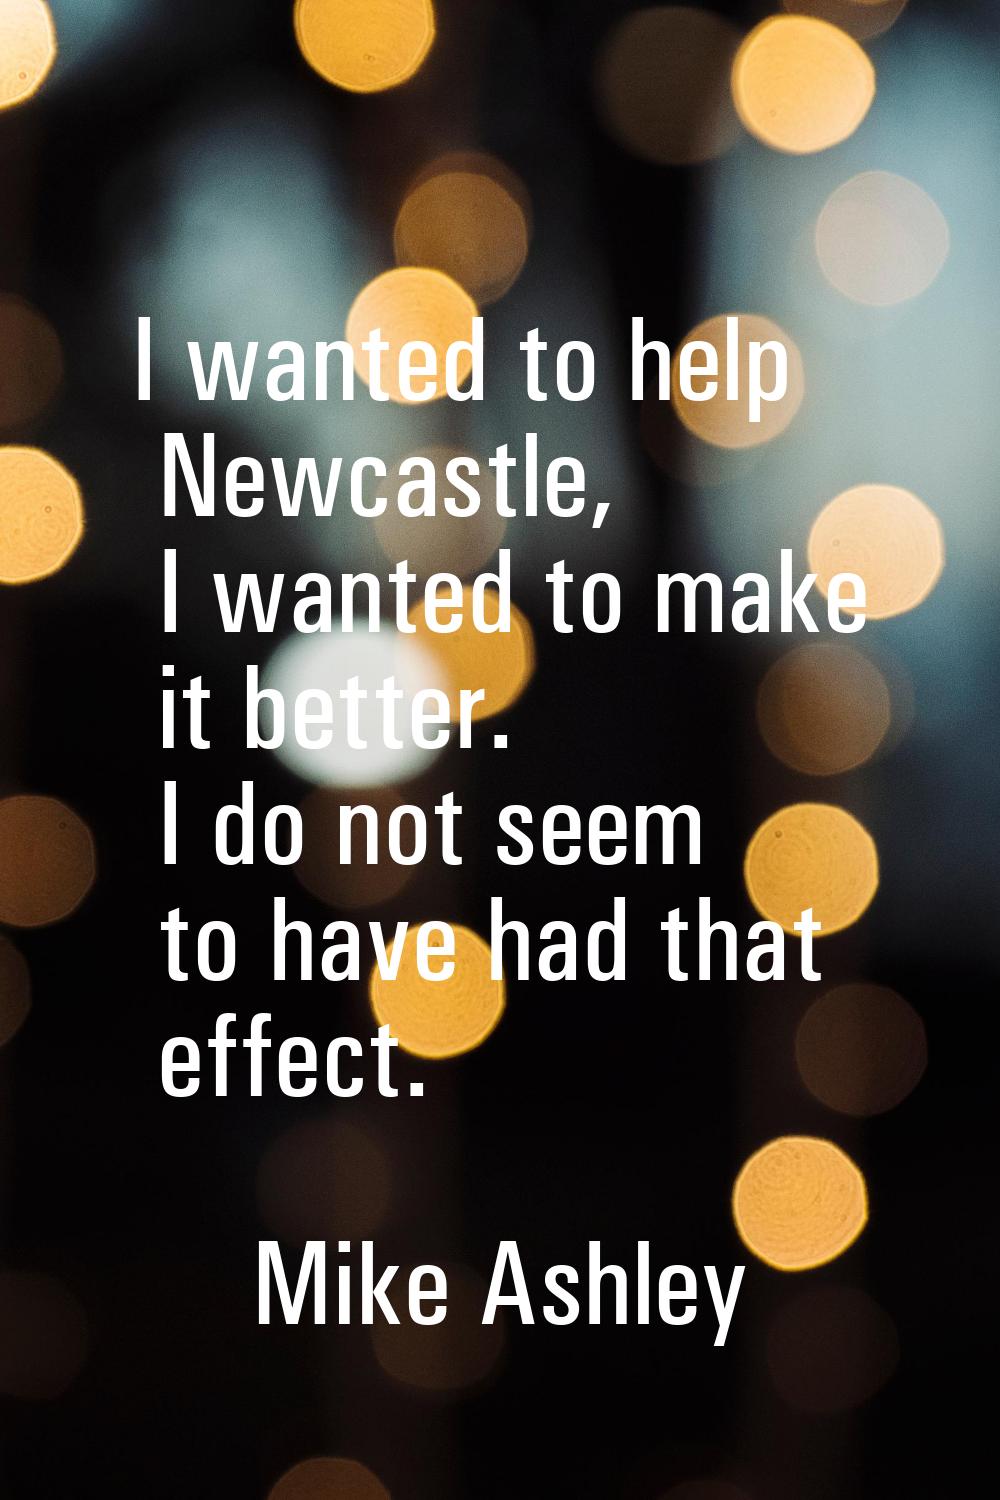 I wanted to help Newcastle, I wanted to make it better. I do not seem to have had that effect.